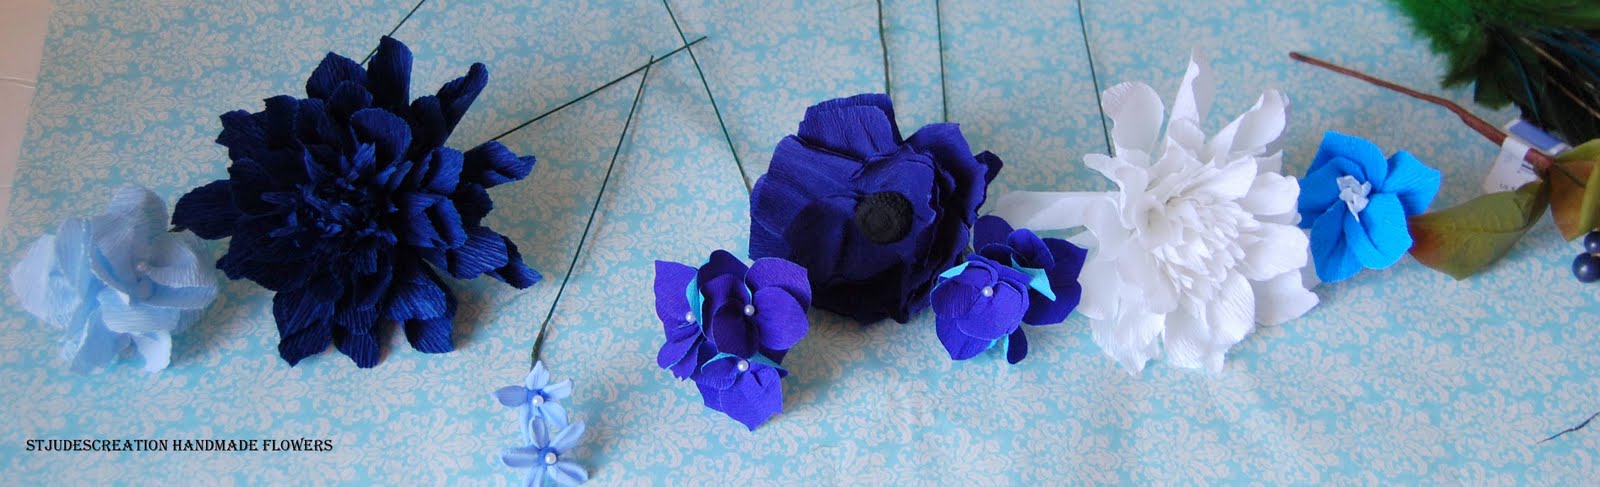 Blue wedding bouquet sampler with delphinium with peacock feather cobalt